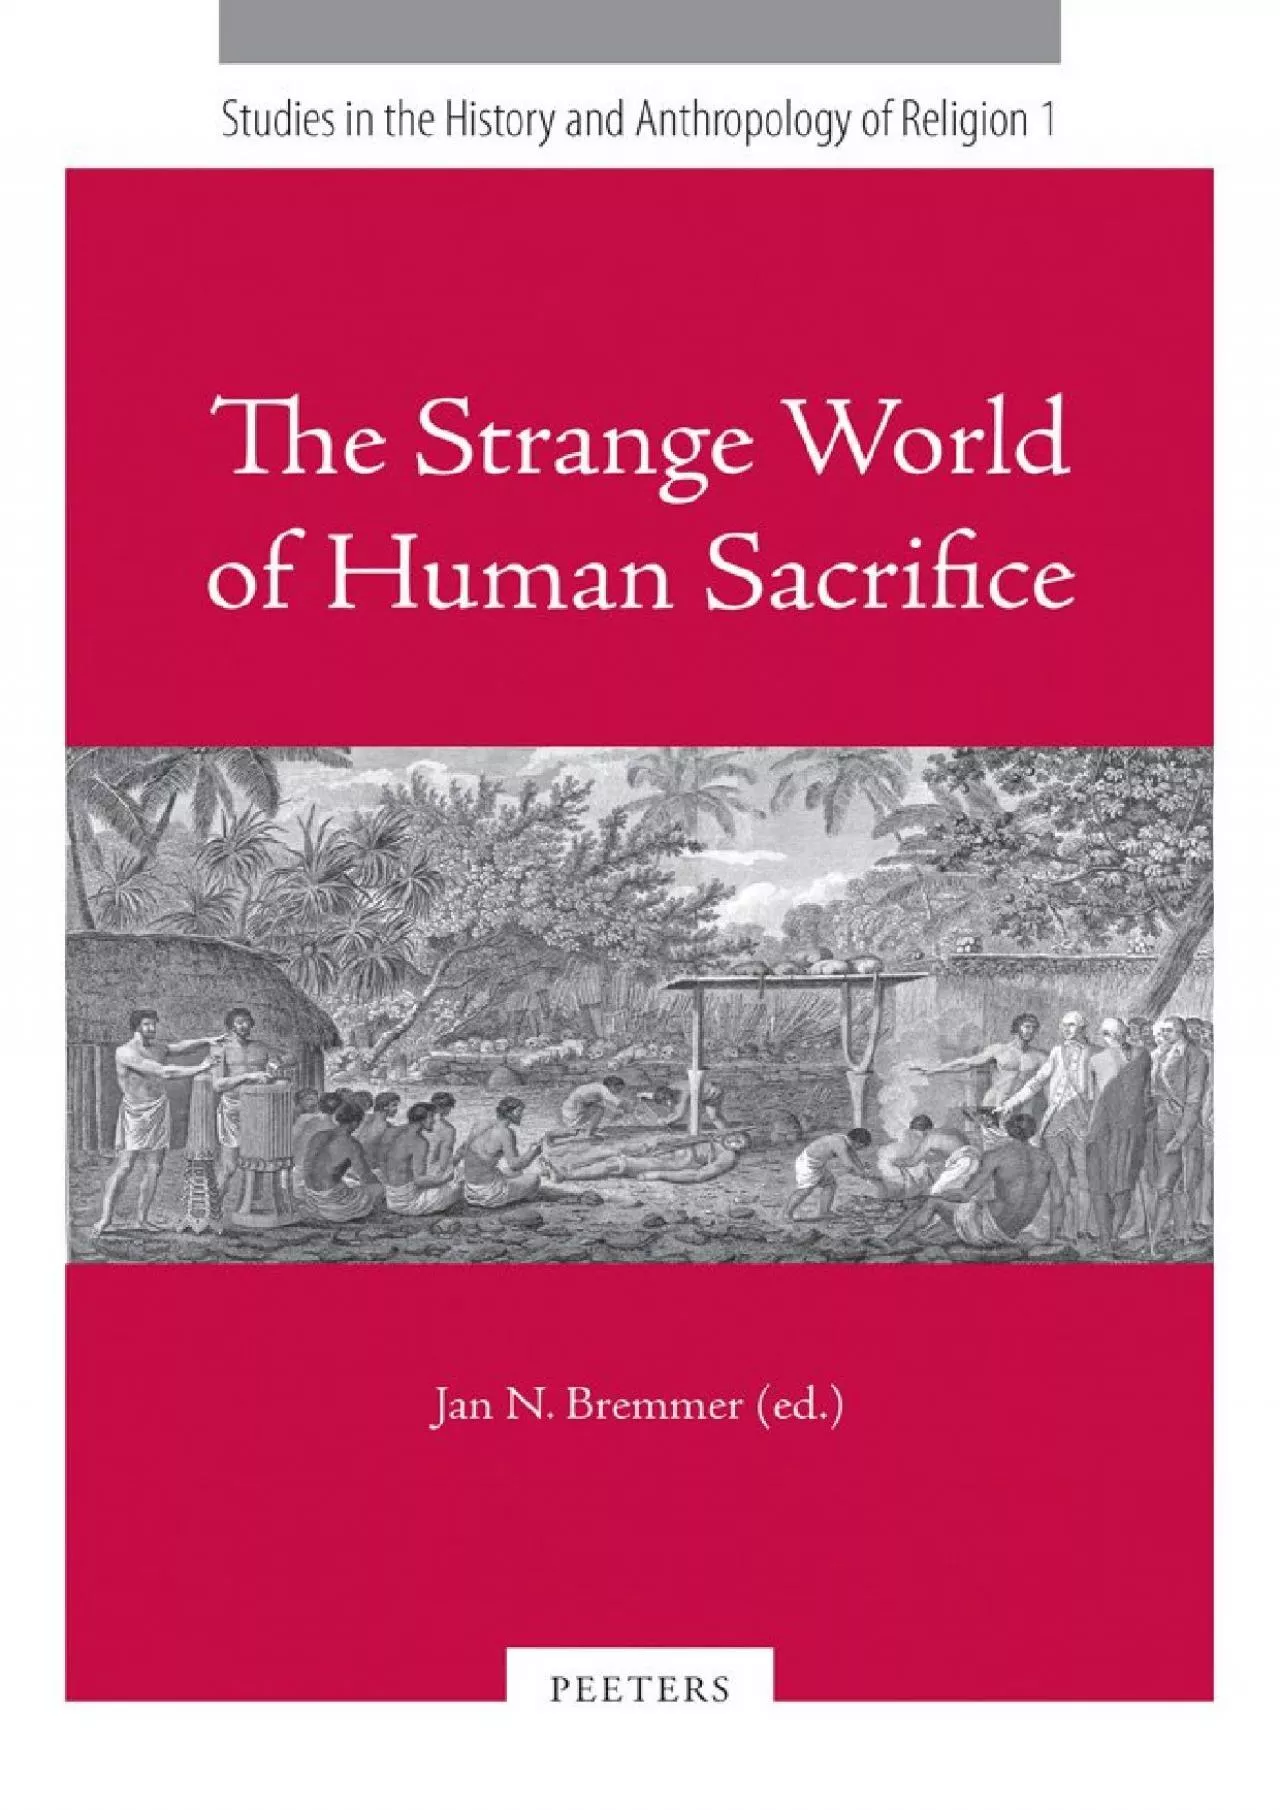 (EBOOK)-The Strange World of Human Sacrifice (Studies in the History and Anthropology